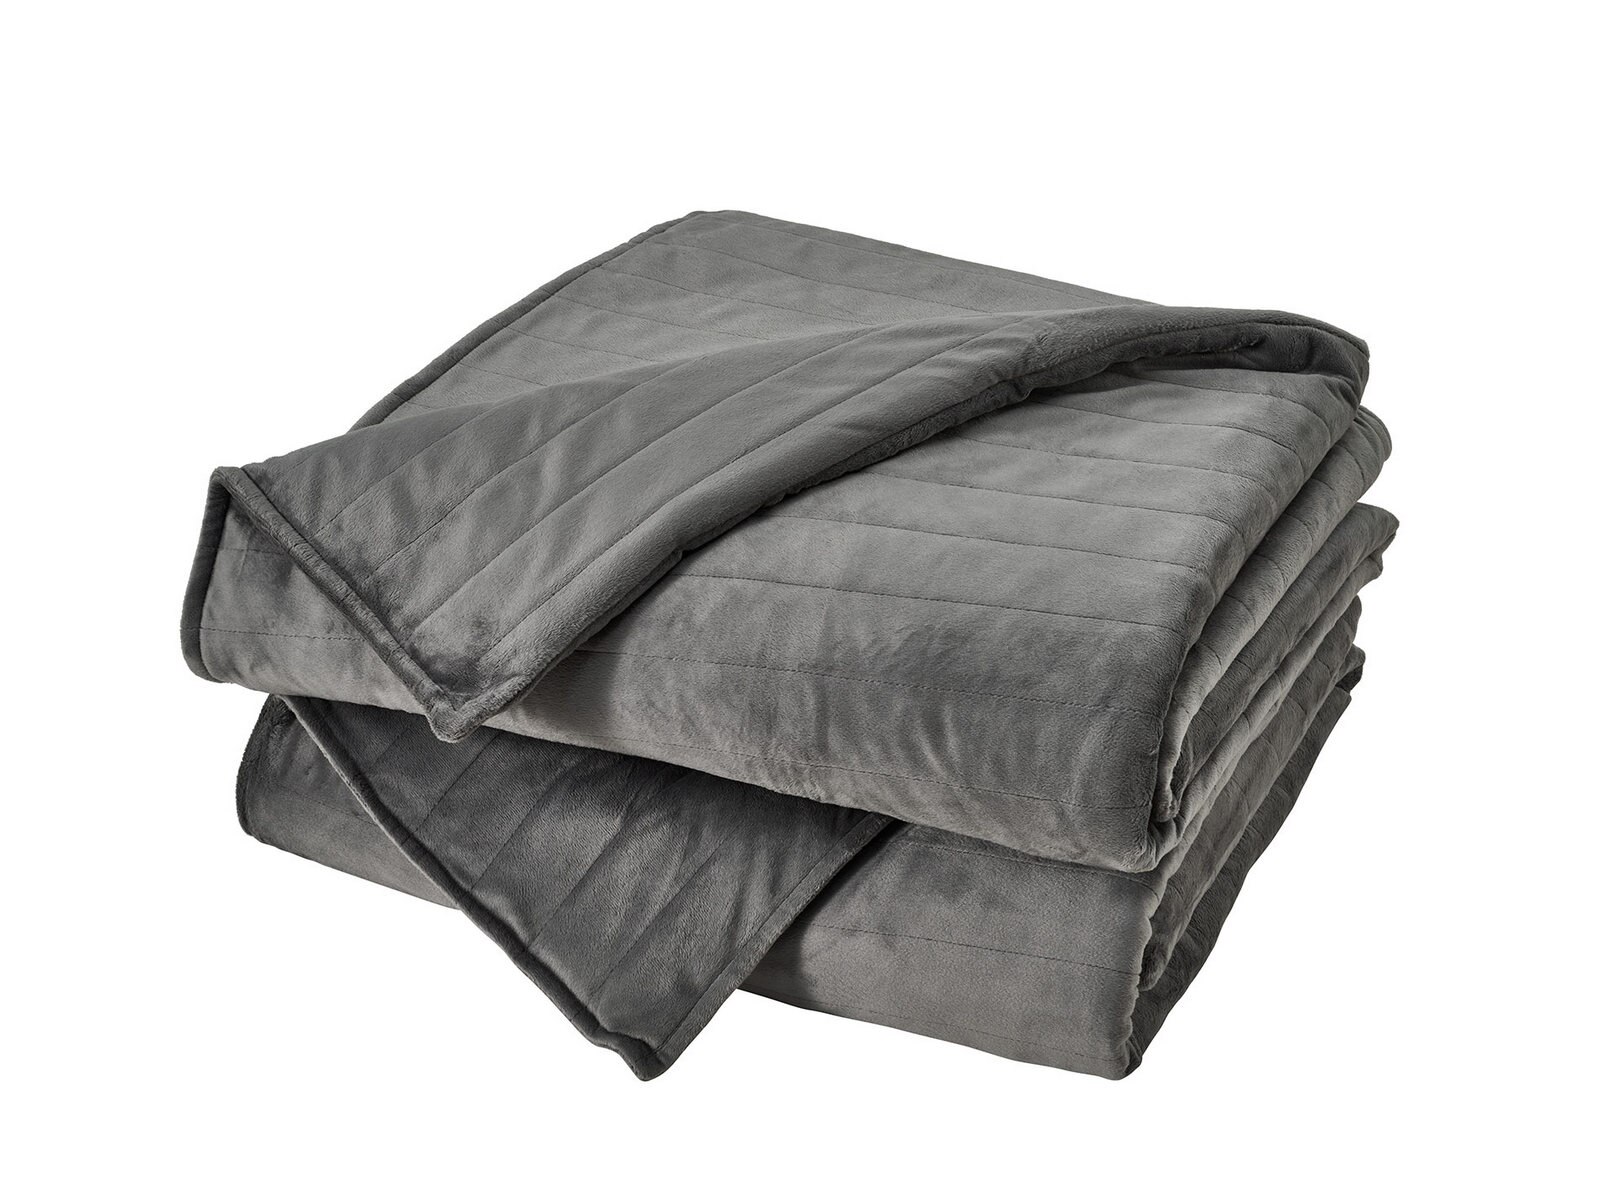 15 lb Weighted Blanket